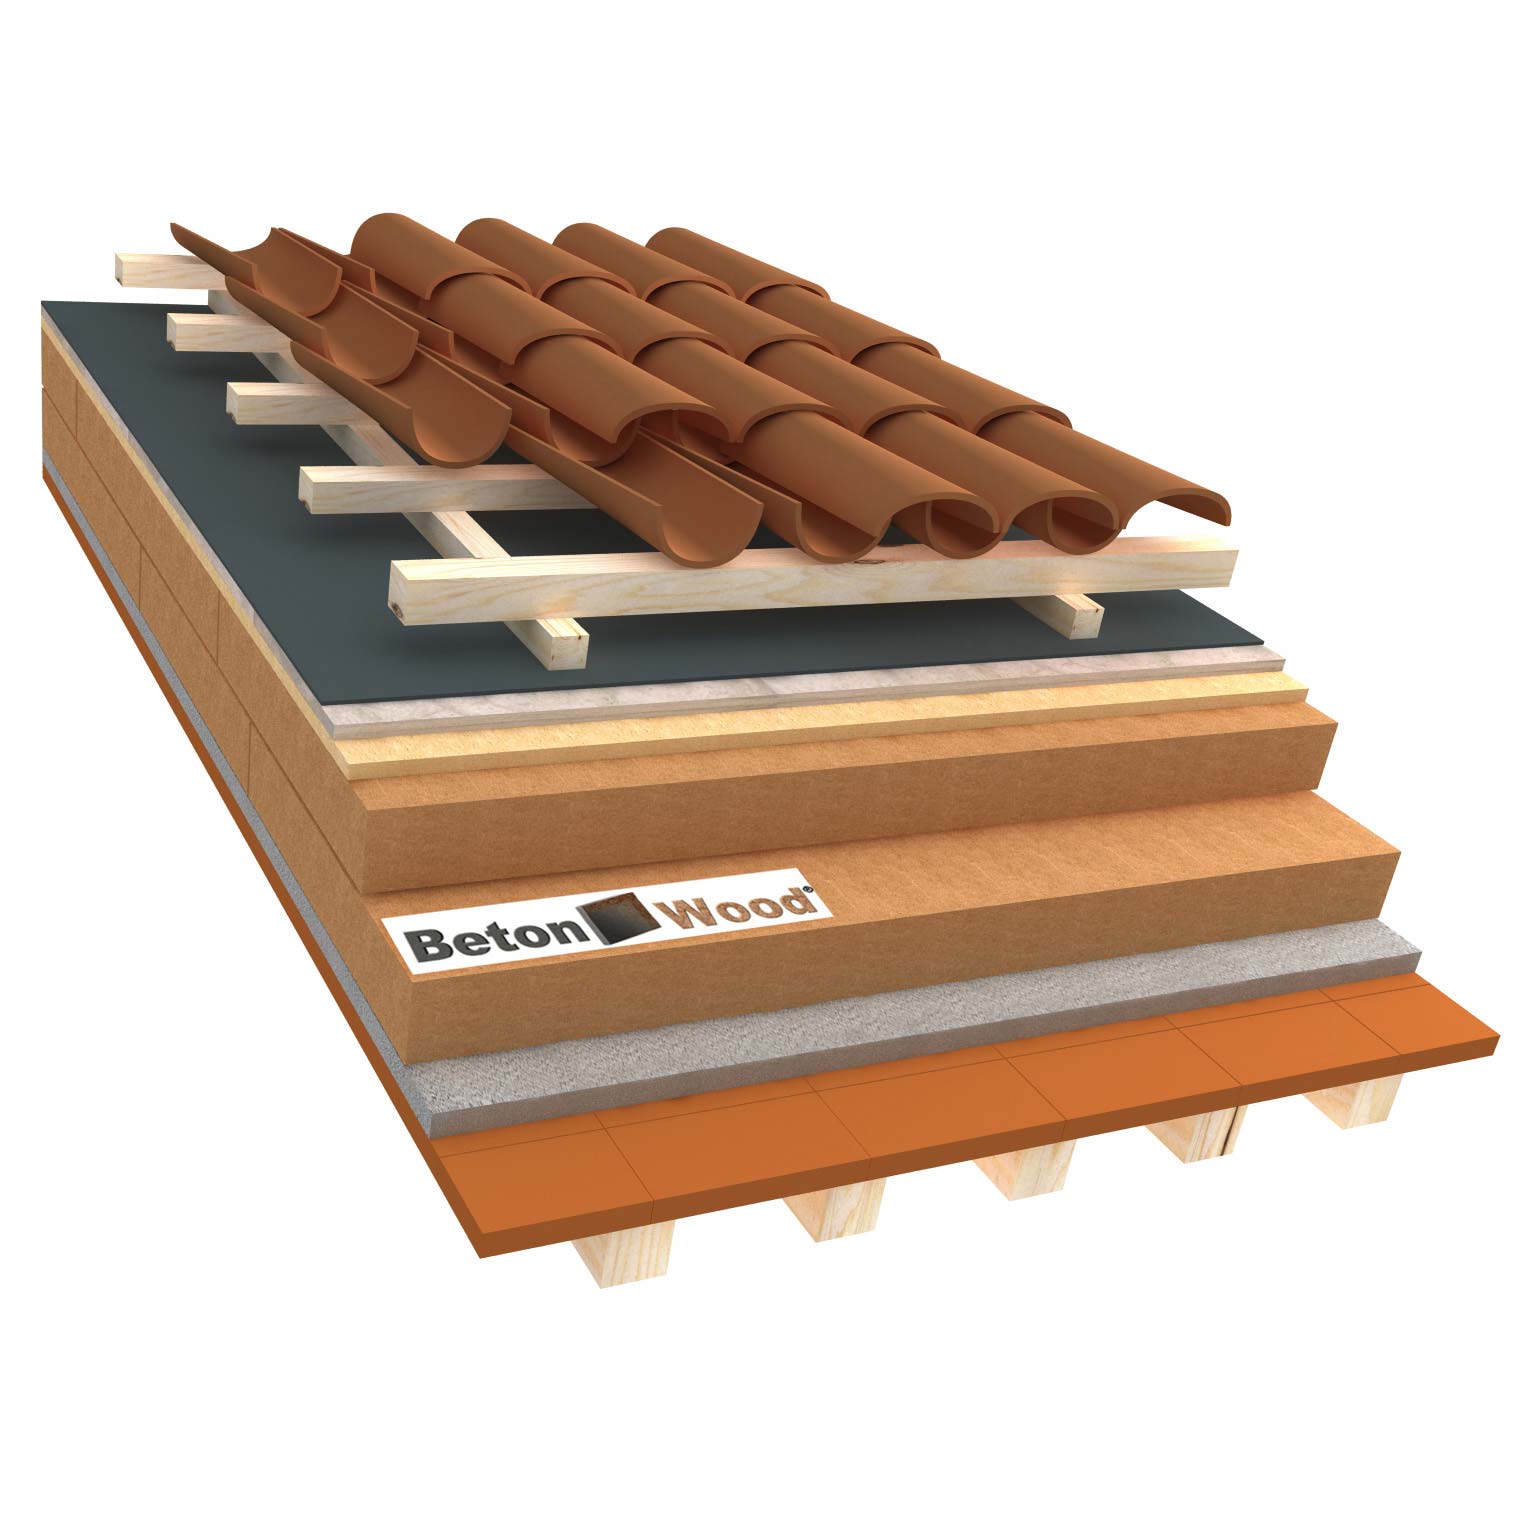 Ventilated roof with fiber wood Isorel, Therm and cement bonded particle boards on terracotta tiles